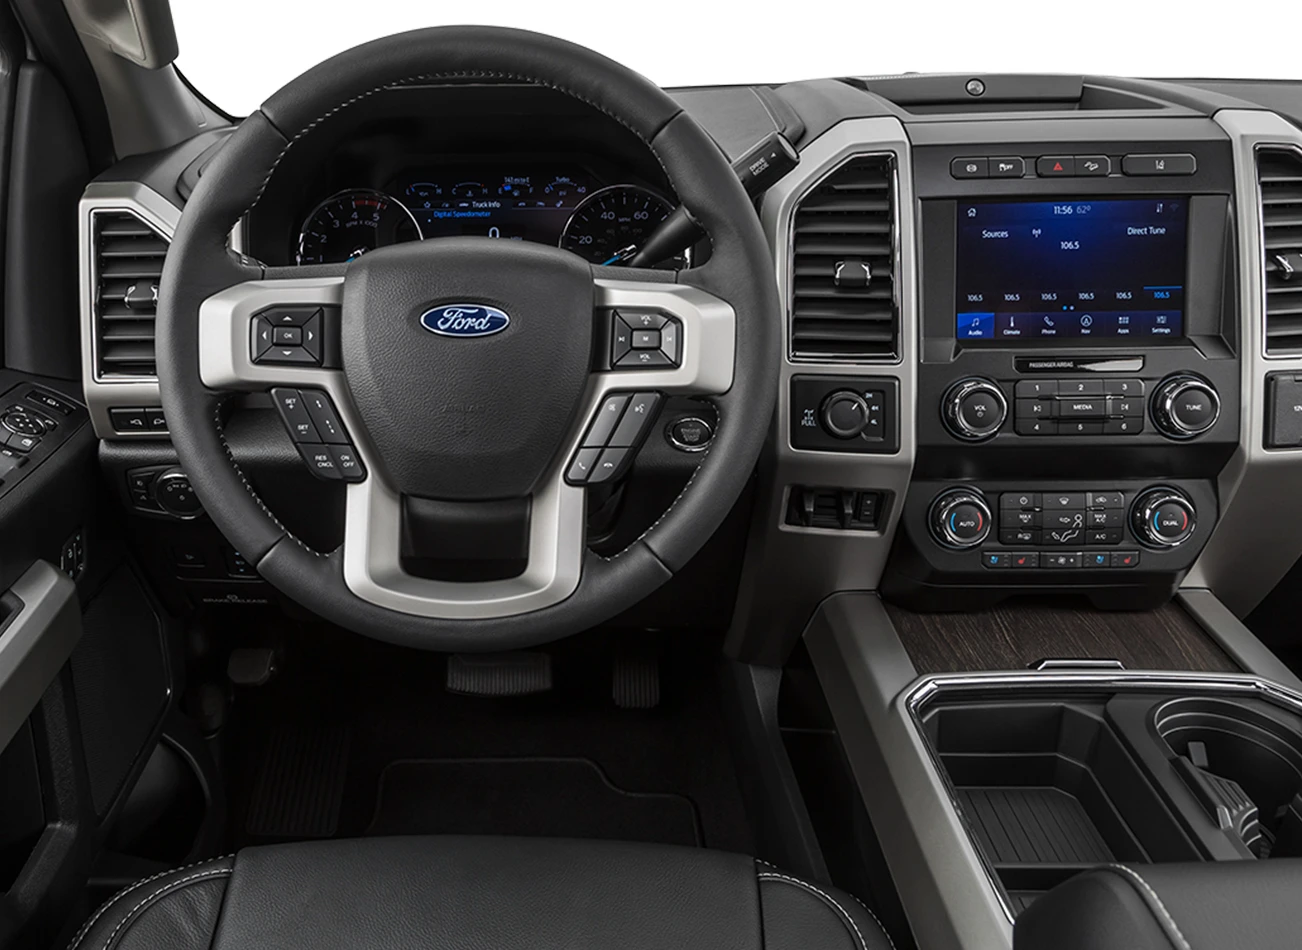 2020 Ford F-250 Review: Dashboard | CarMax